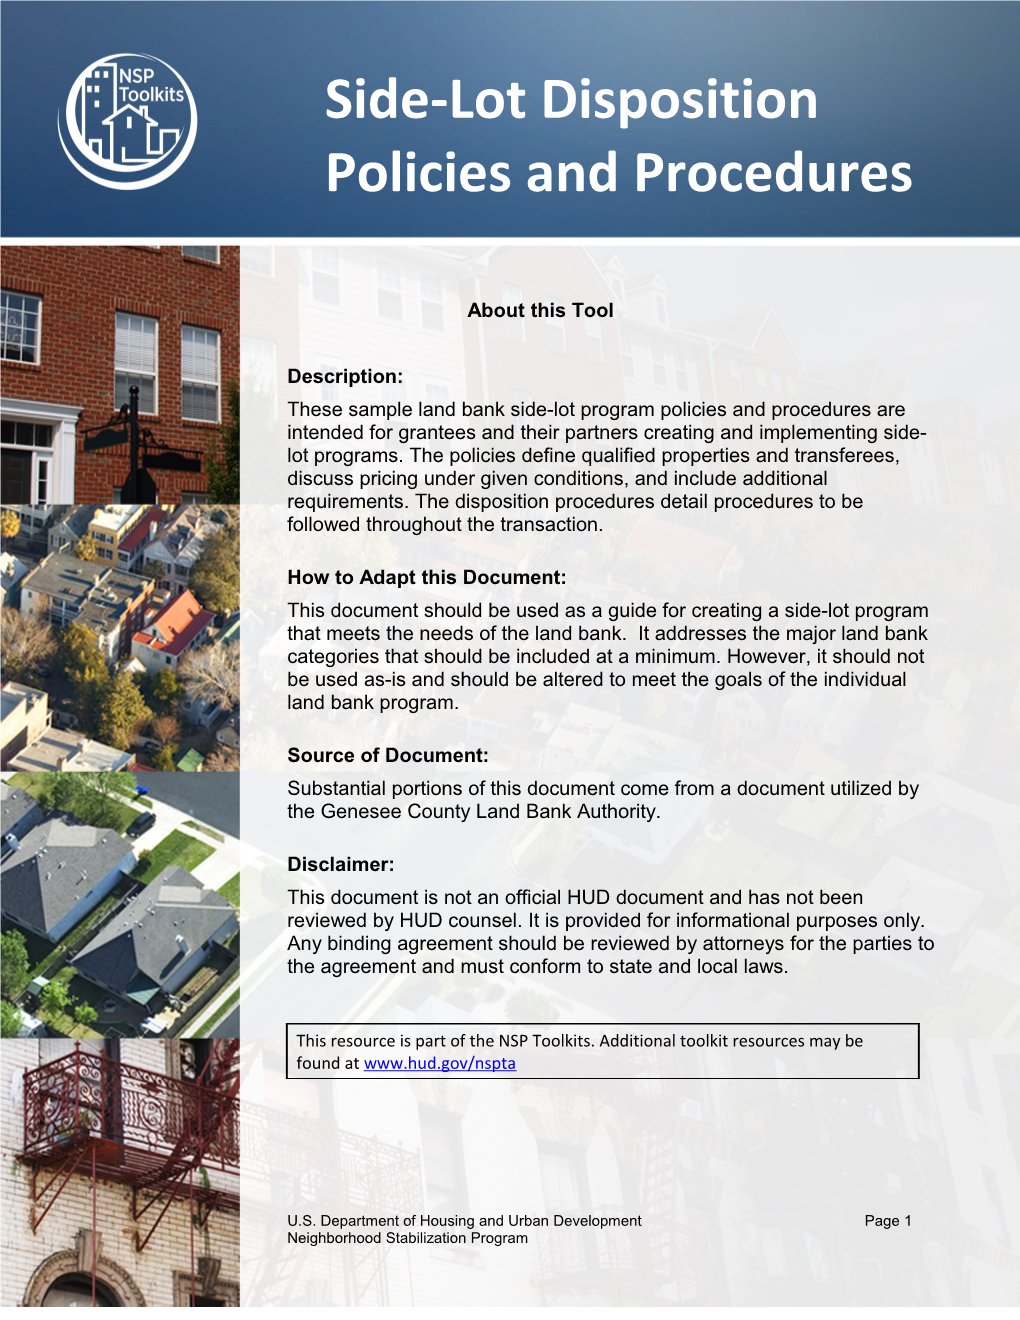 Side-Lot Disposition Policy and Procedures